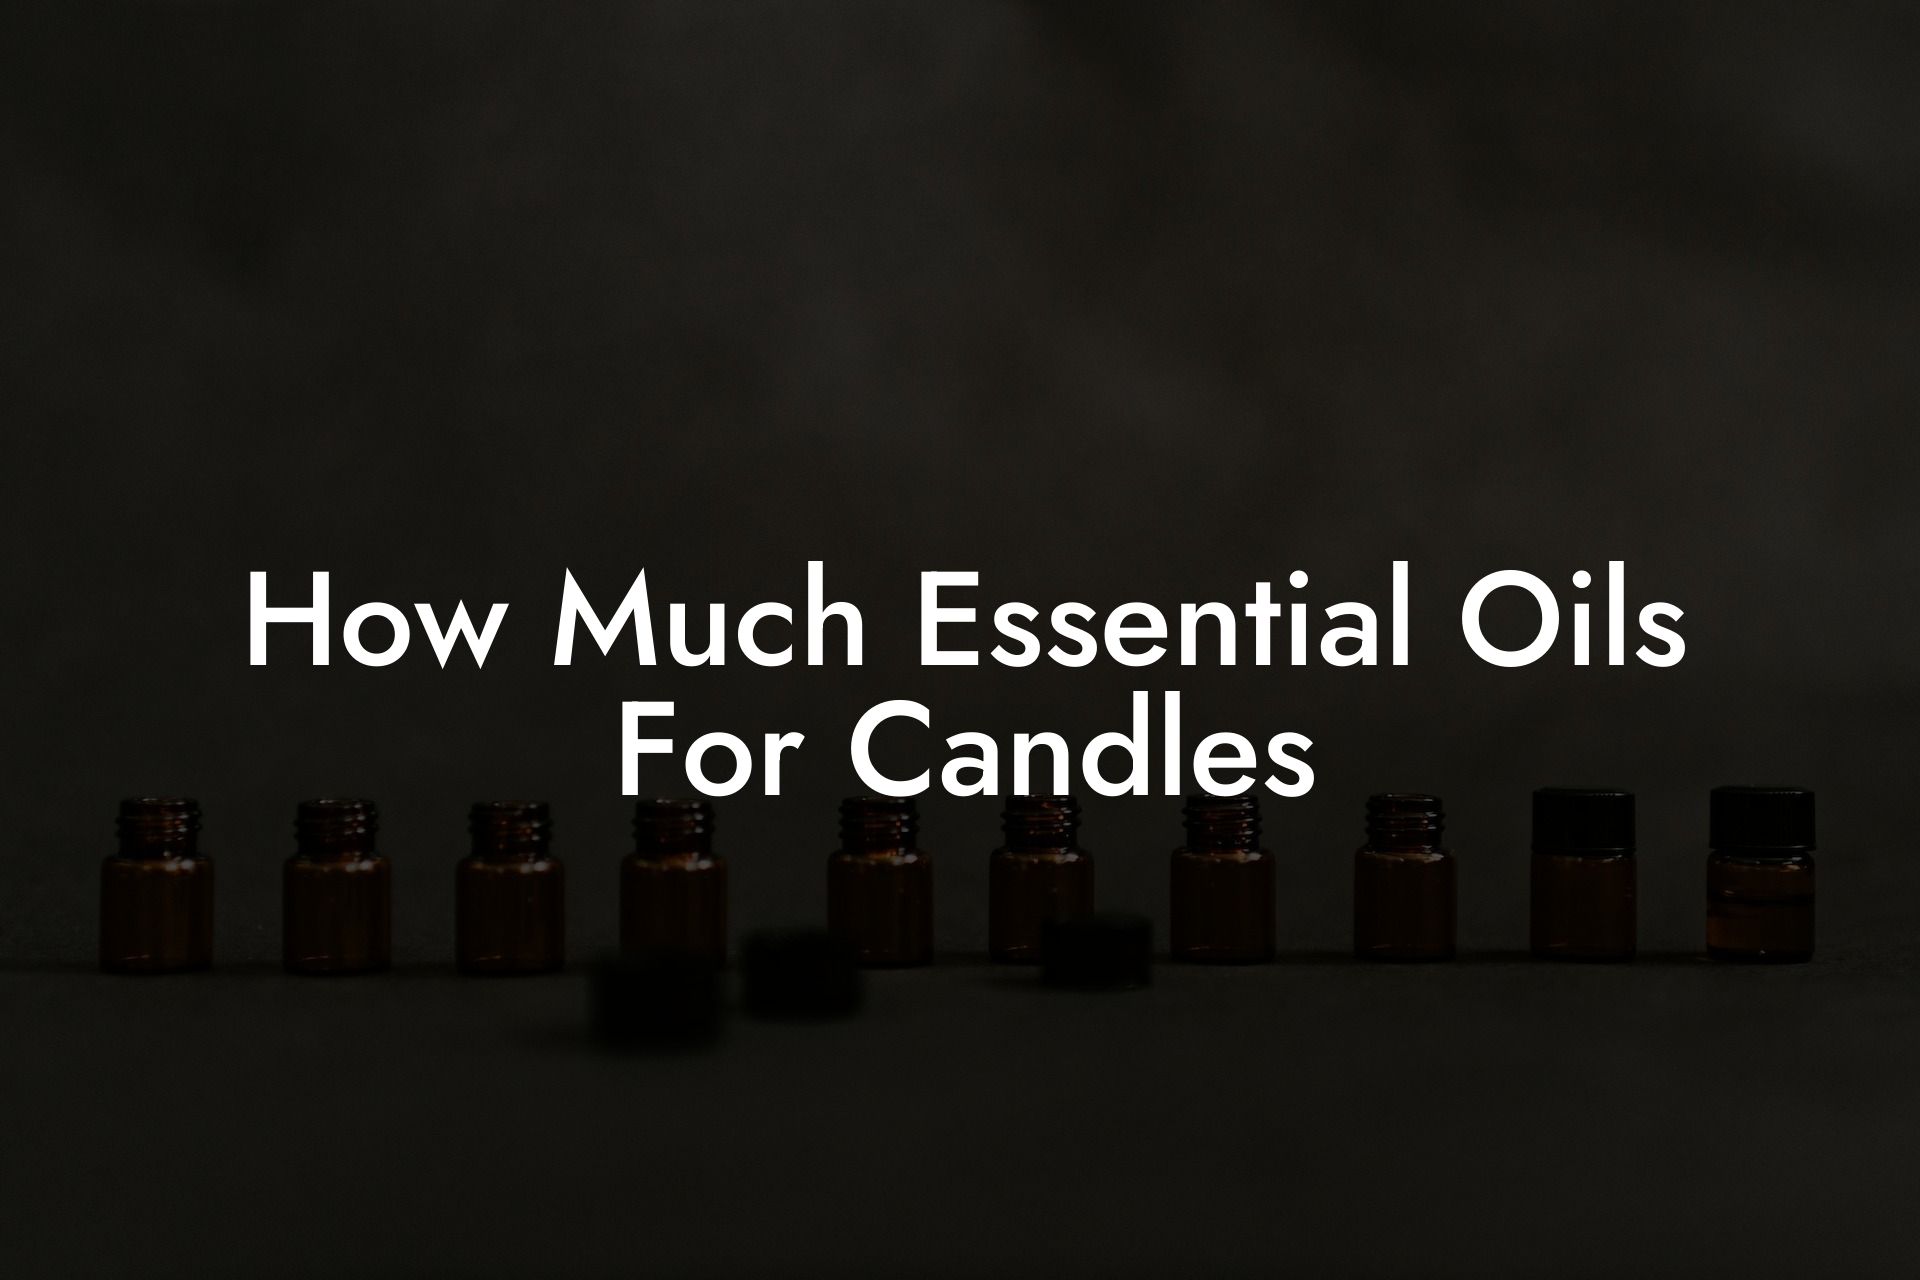 How Much Essential Oils For Candles